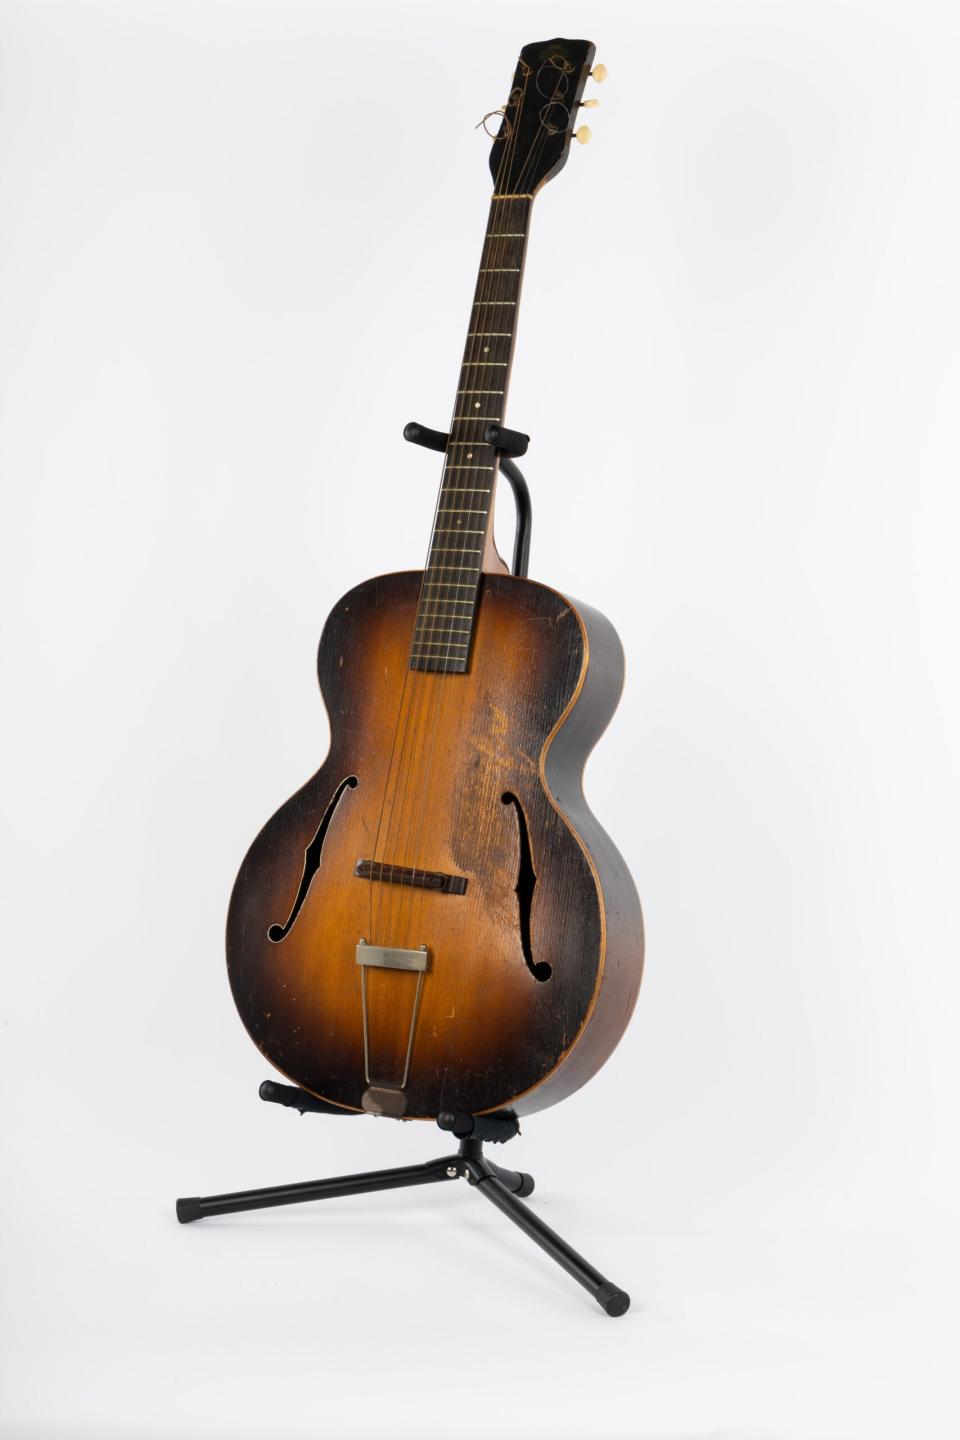 Dick Curless' first guitar -- a Regal archtop model given to him when he was a boy -- will be on display in the Country Music Hall of Fame and Museum through 2024